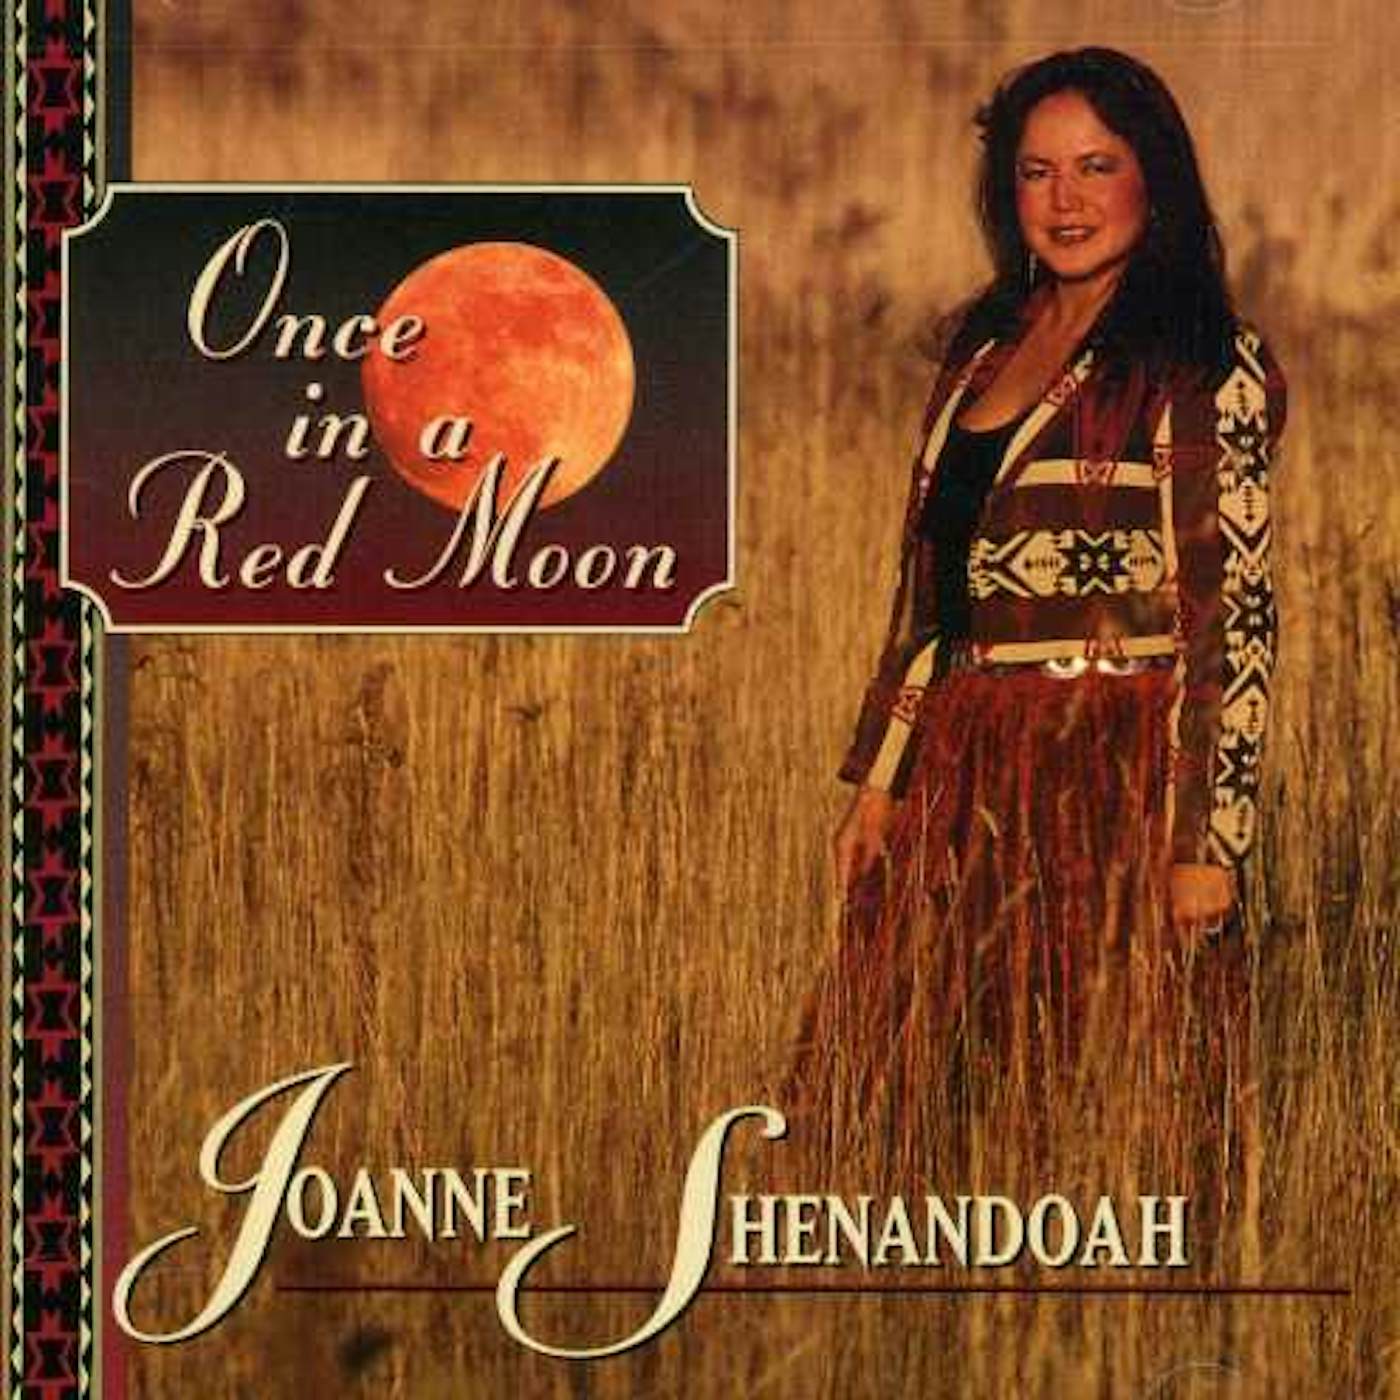 Joanne Shenandoah ONCE IN A RED MOON CD